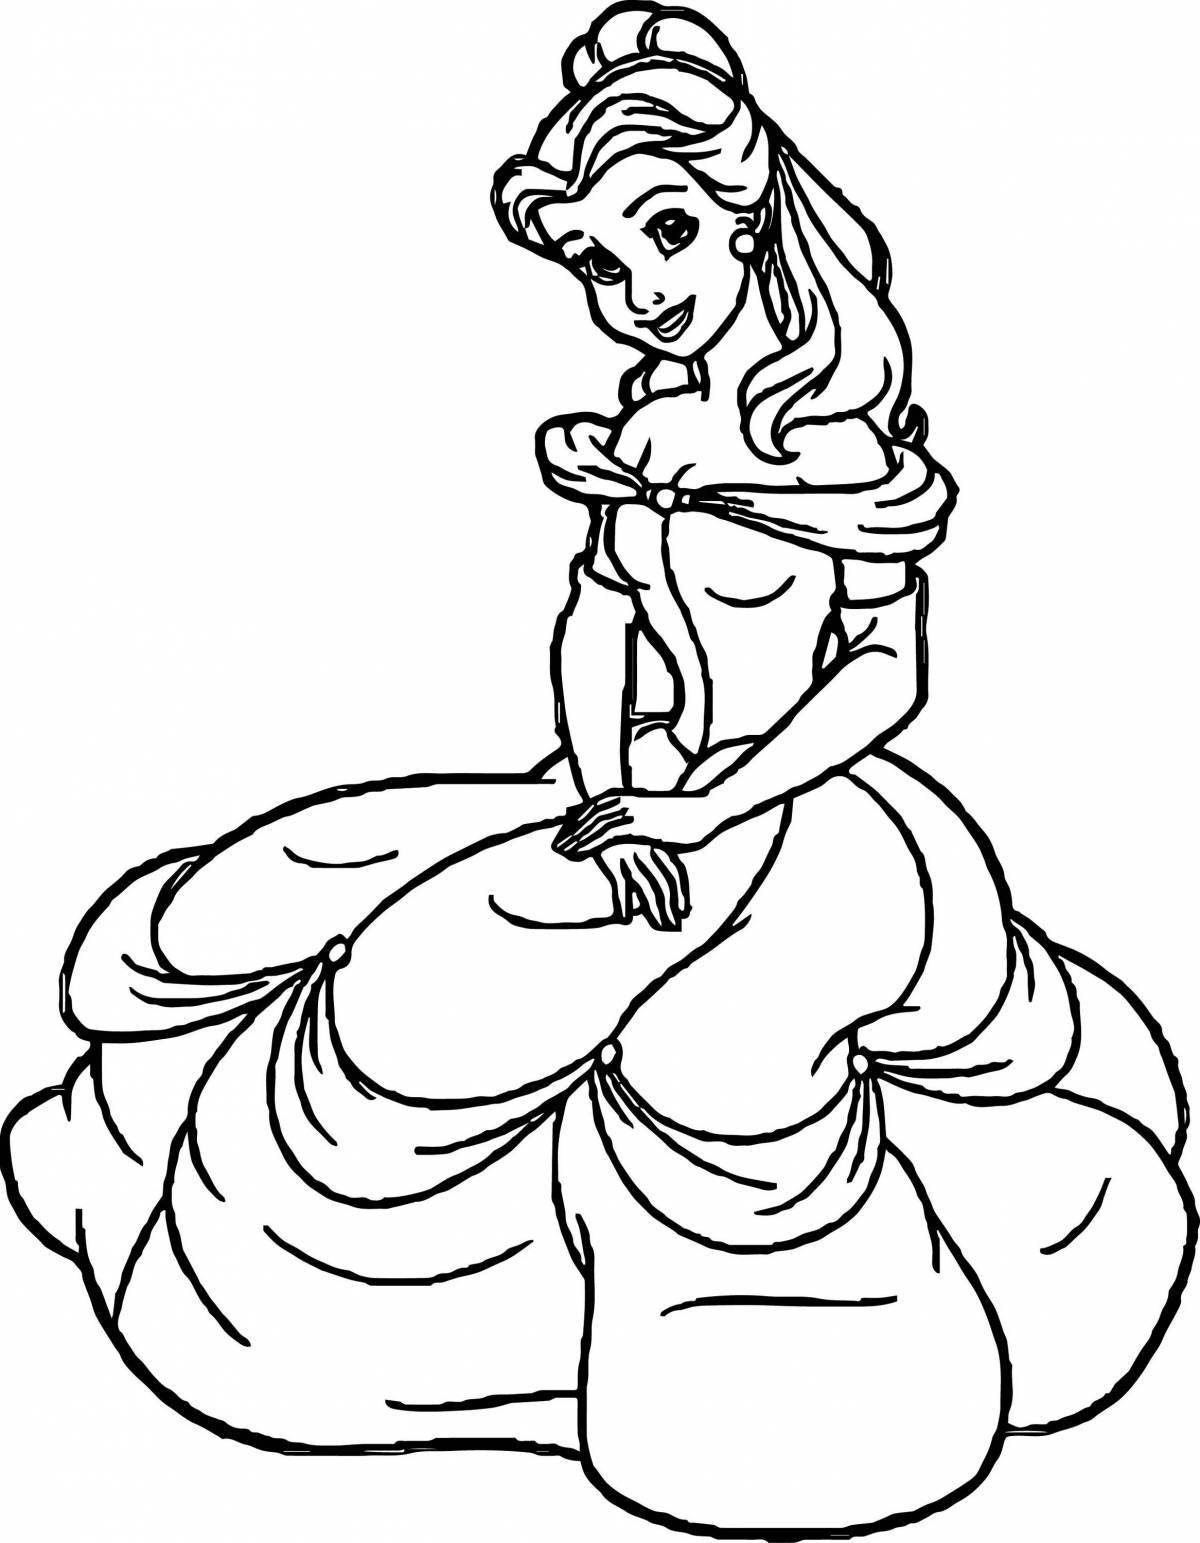 Coloring page glamorous underwear for children